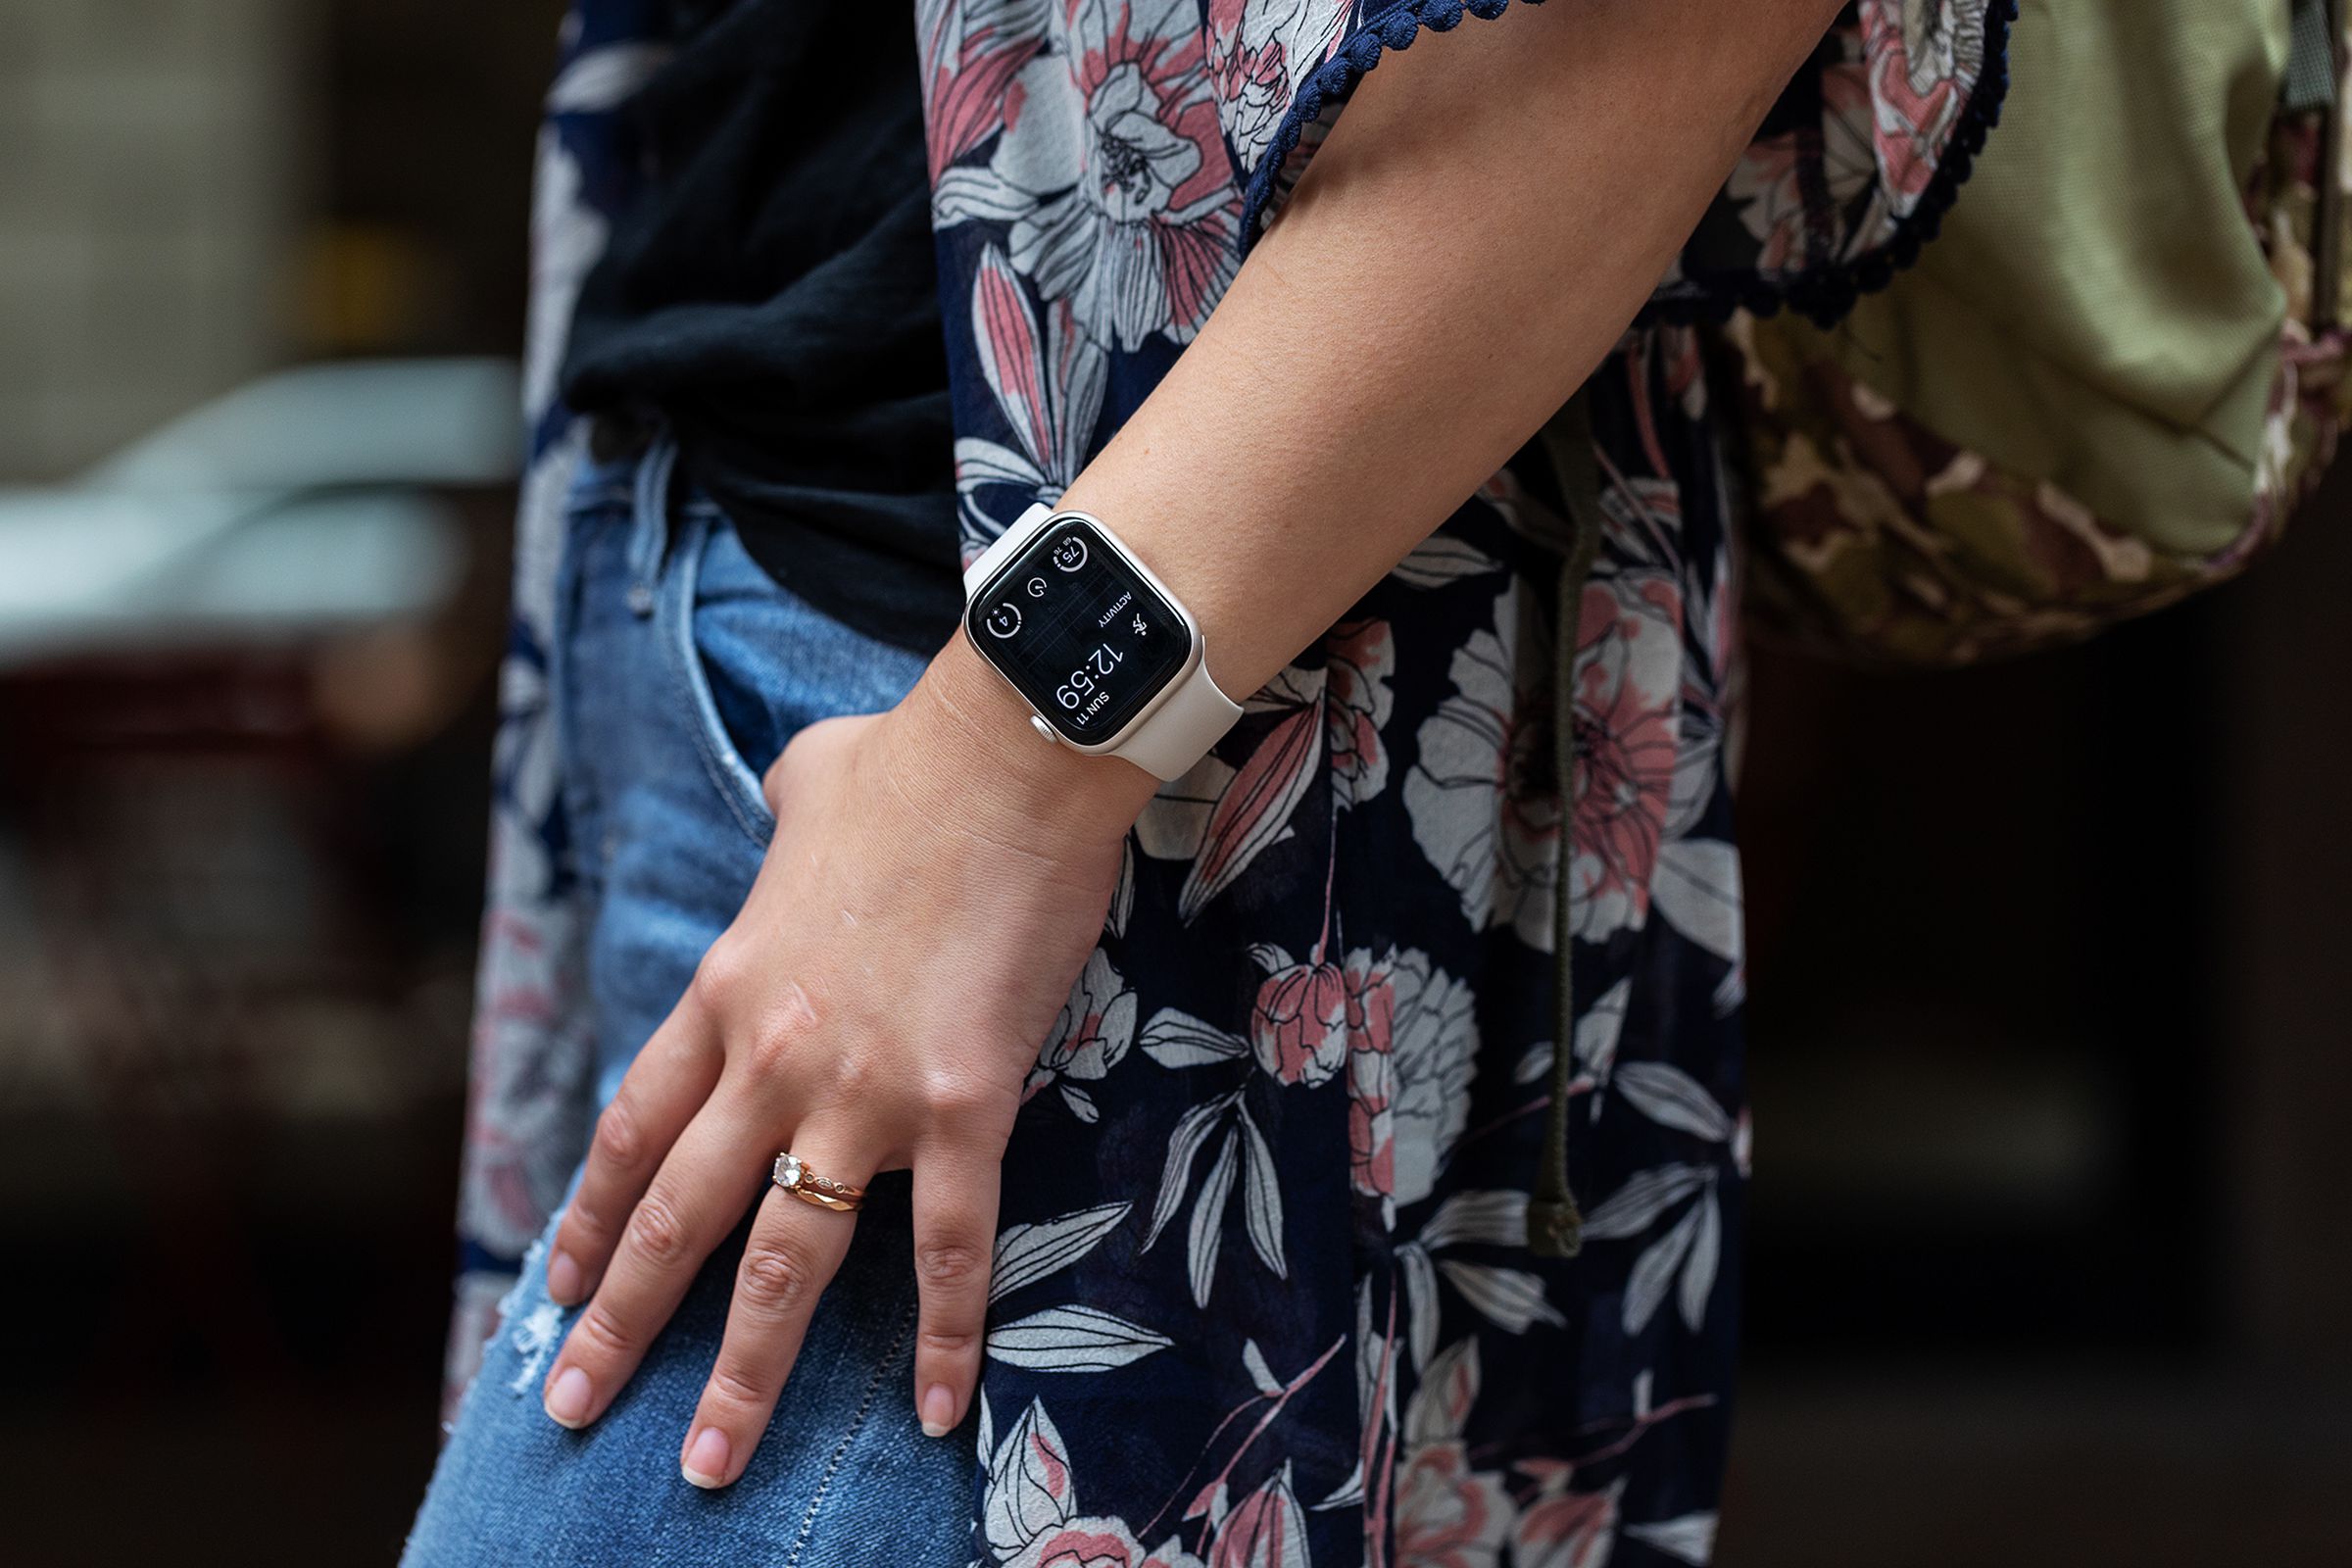 Woman wearing the Series 8 with her hand in a jeans pocket.